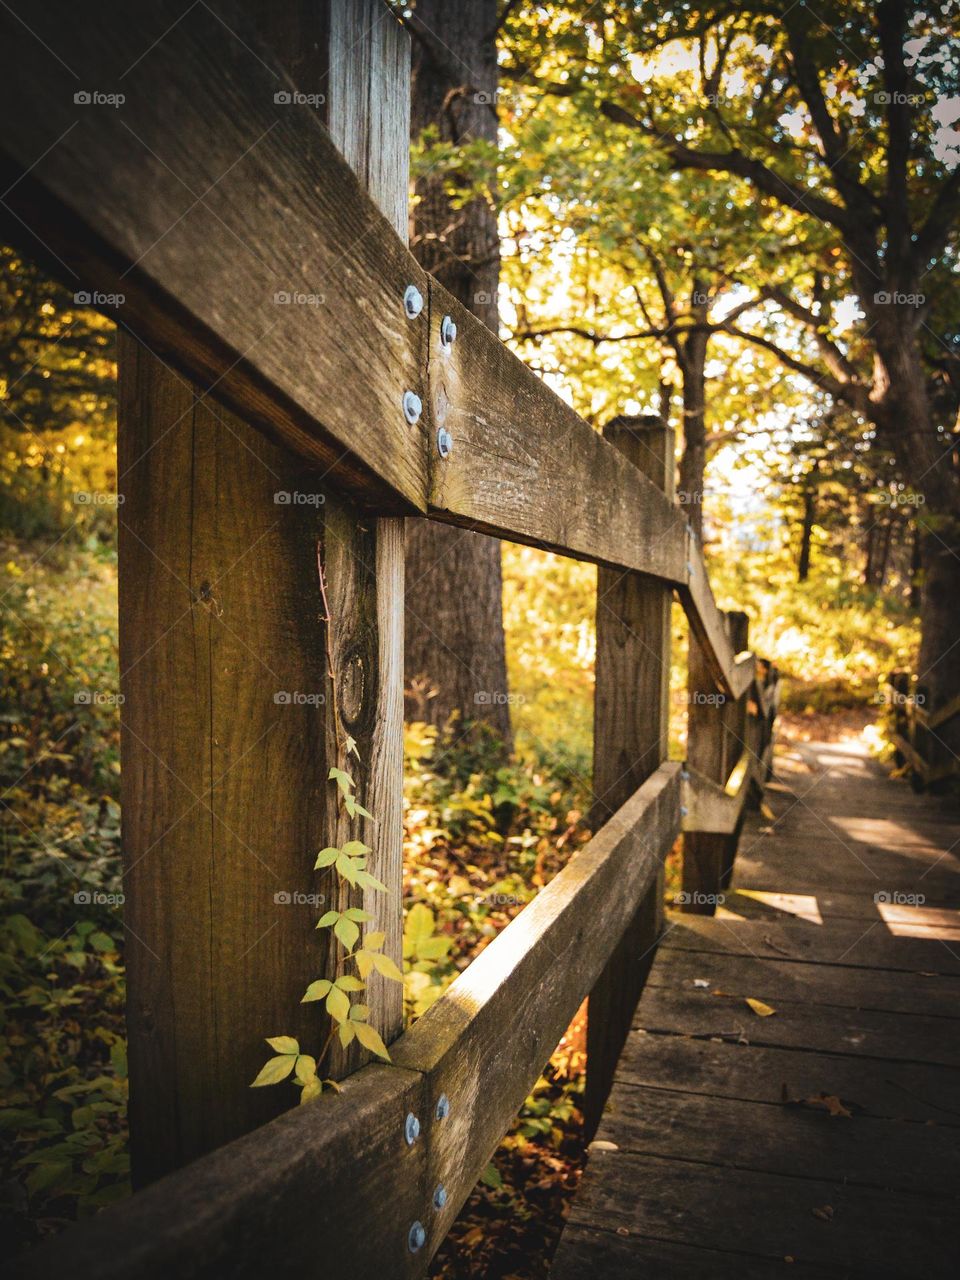 naturally sunlit wooden walkway through a forest in autumn with greenery and vines